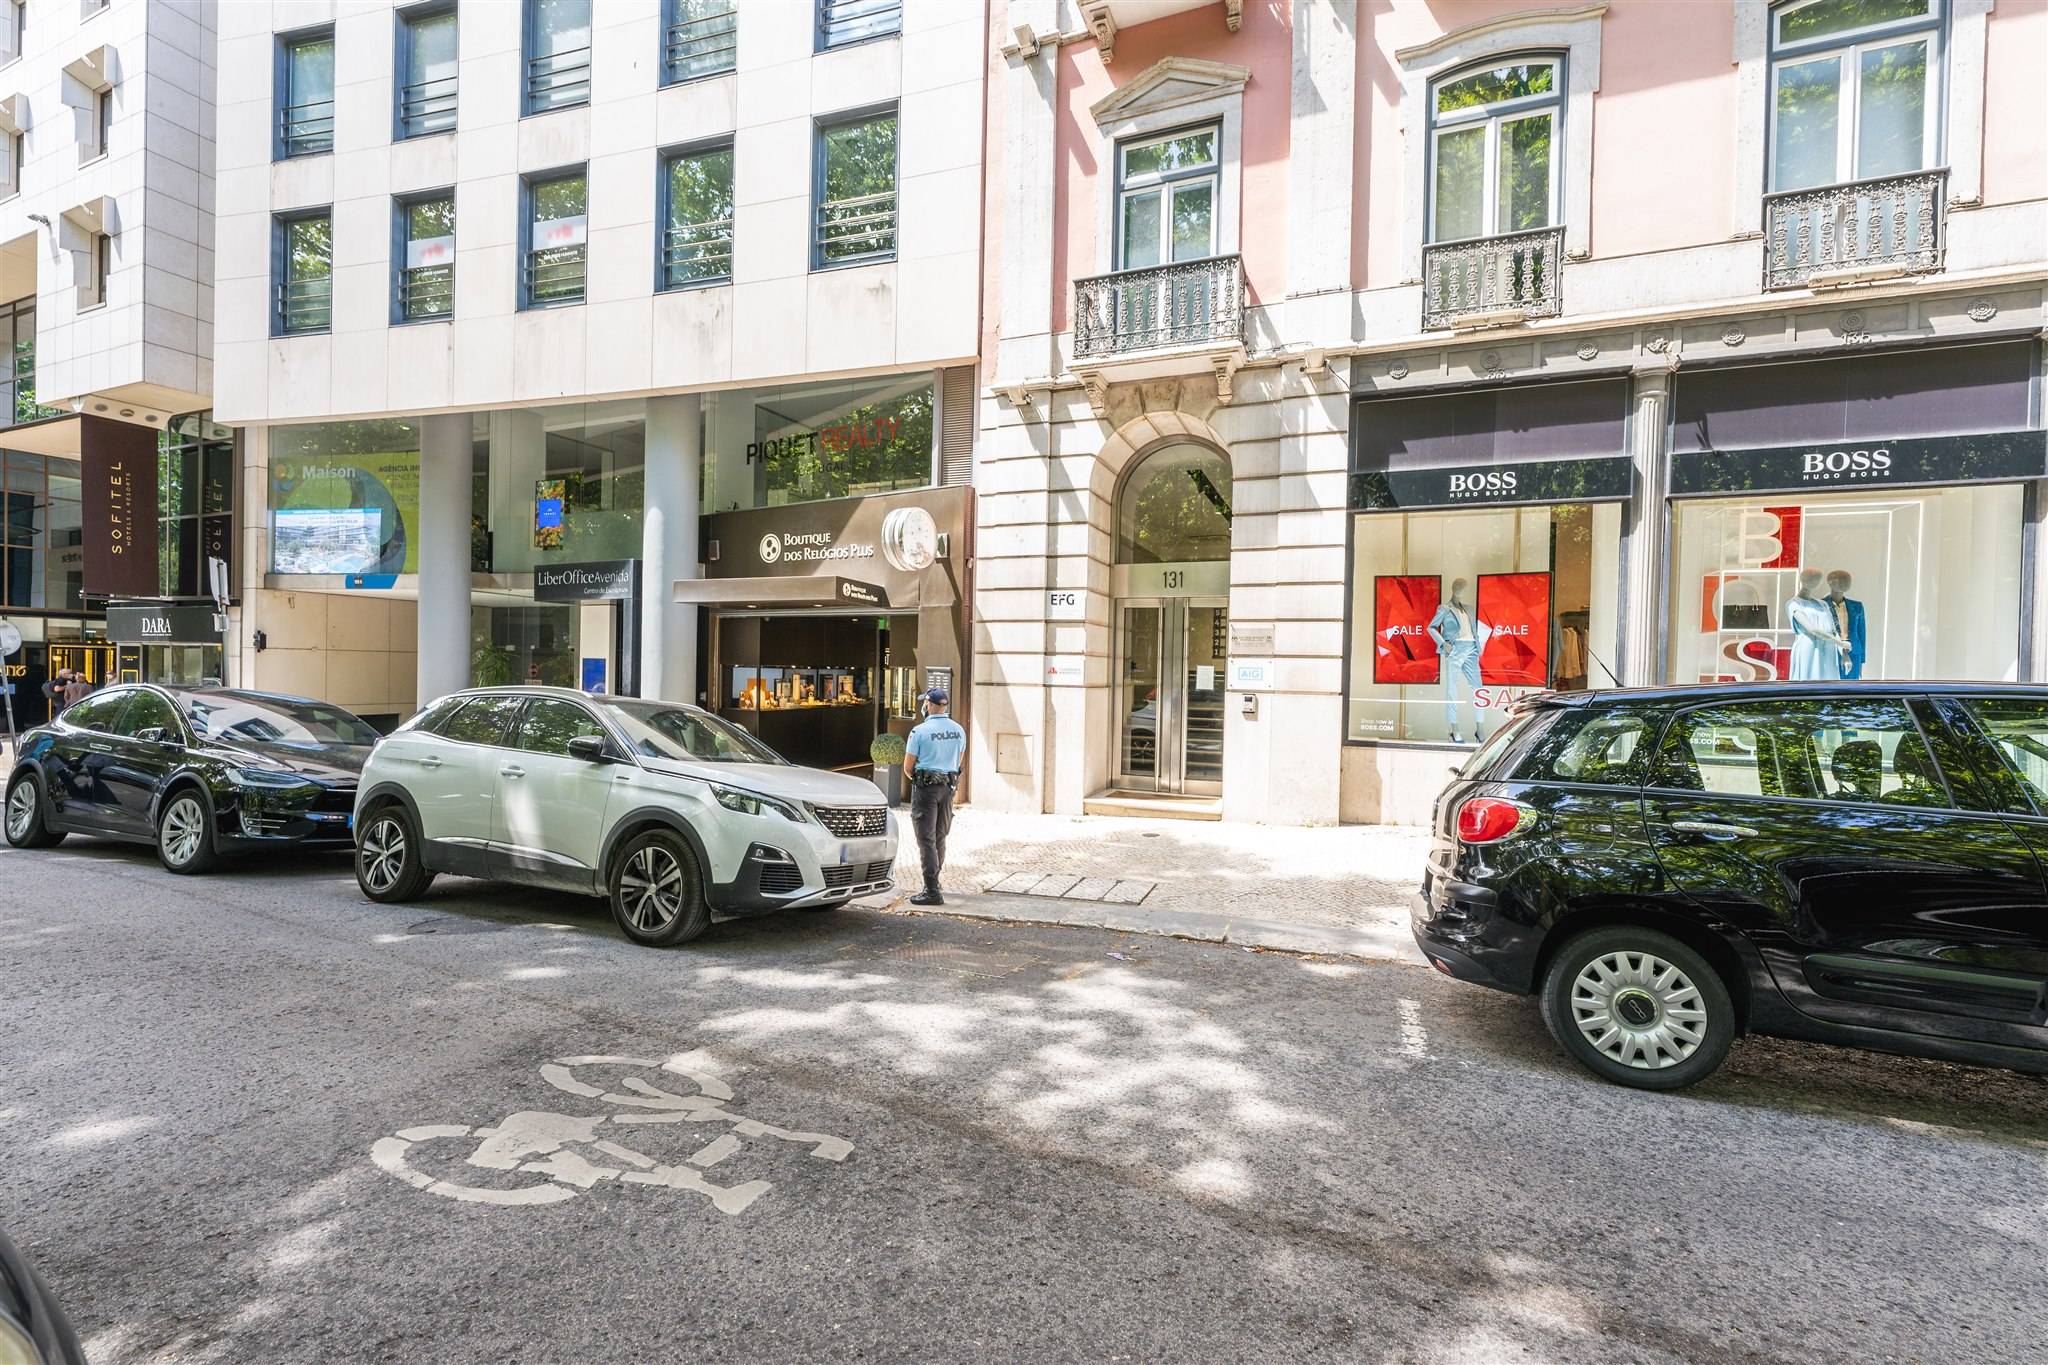 Avenida da Liberdade, 129, is a 75m2 office located in the Prime Business District, home of the most prestigious famous stores in Lisbon